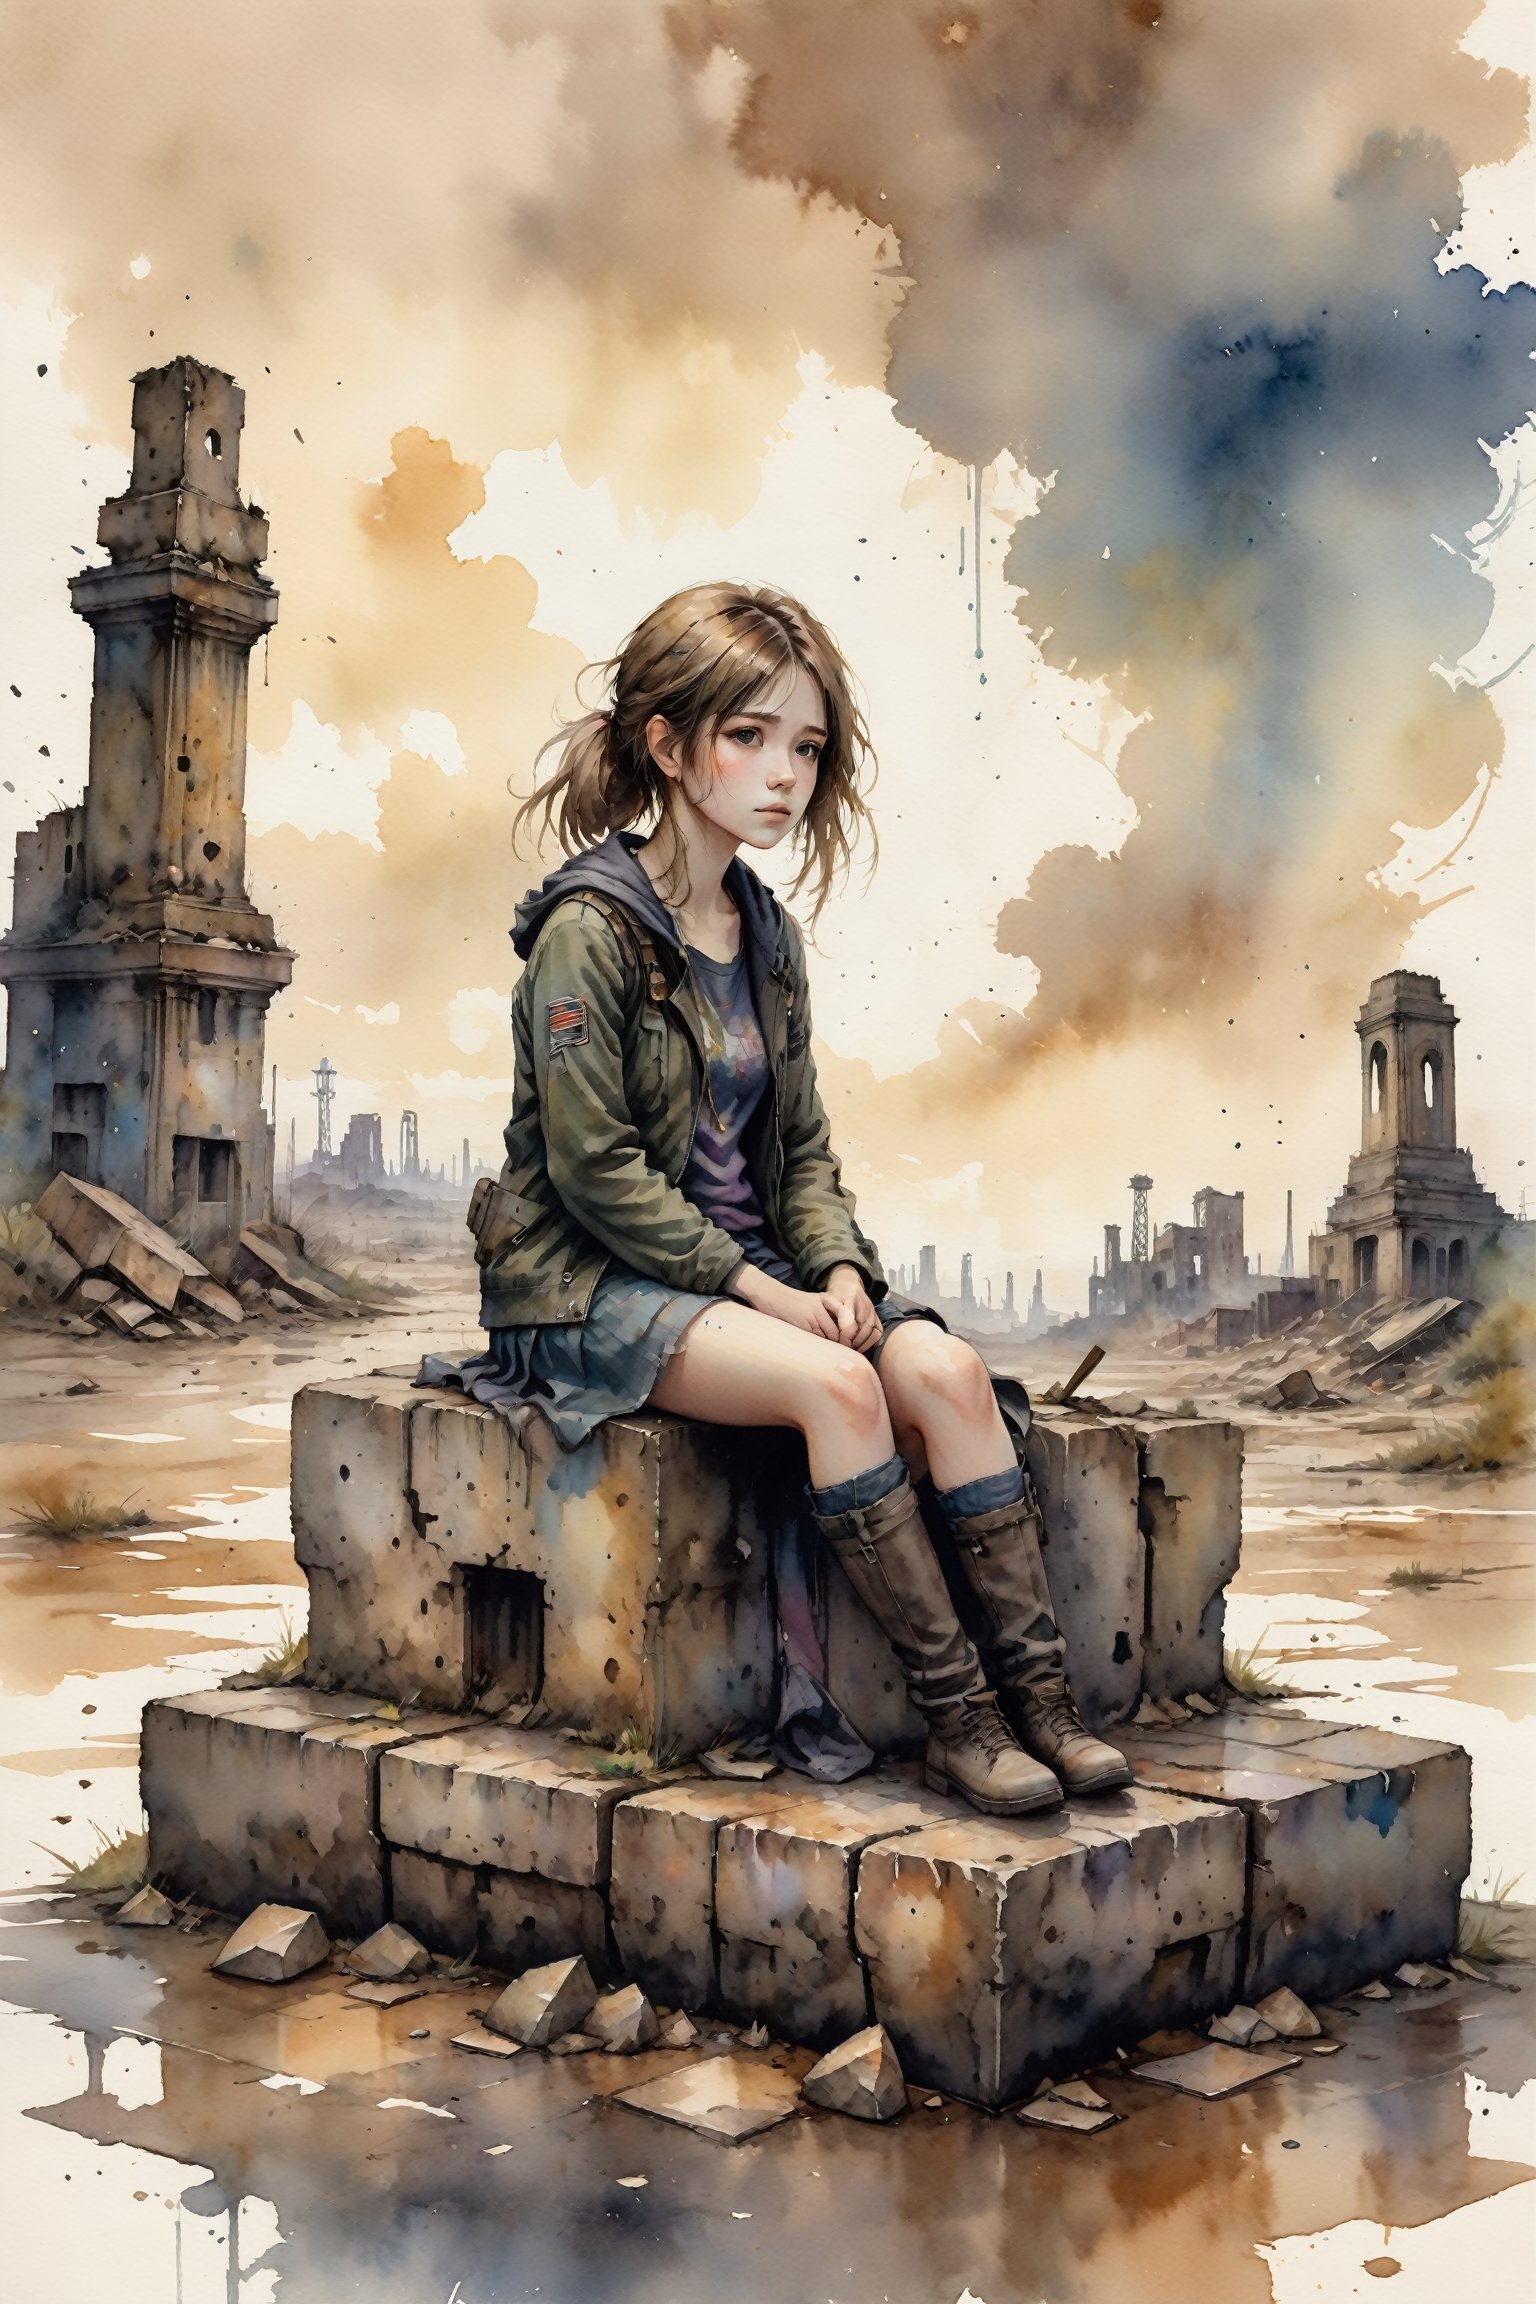 "watercolor painting, soft yet detailed, a young girl sitting on a crumbling concrete block, surrounded by the remnants of civilization, muted and somber color palette, expressive brush strokes depicting her sense of desperation and depression, cloudy sky with hints of light breaking through, post-apocalyptic wasteland with scattered debris and ruins, delicate portrayal of her fragile state, lonely and abandoned"